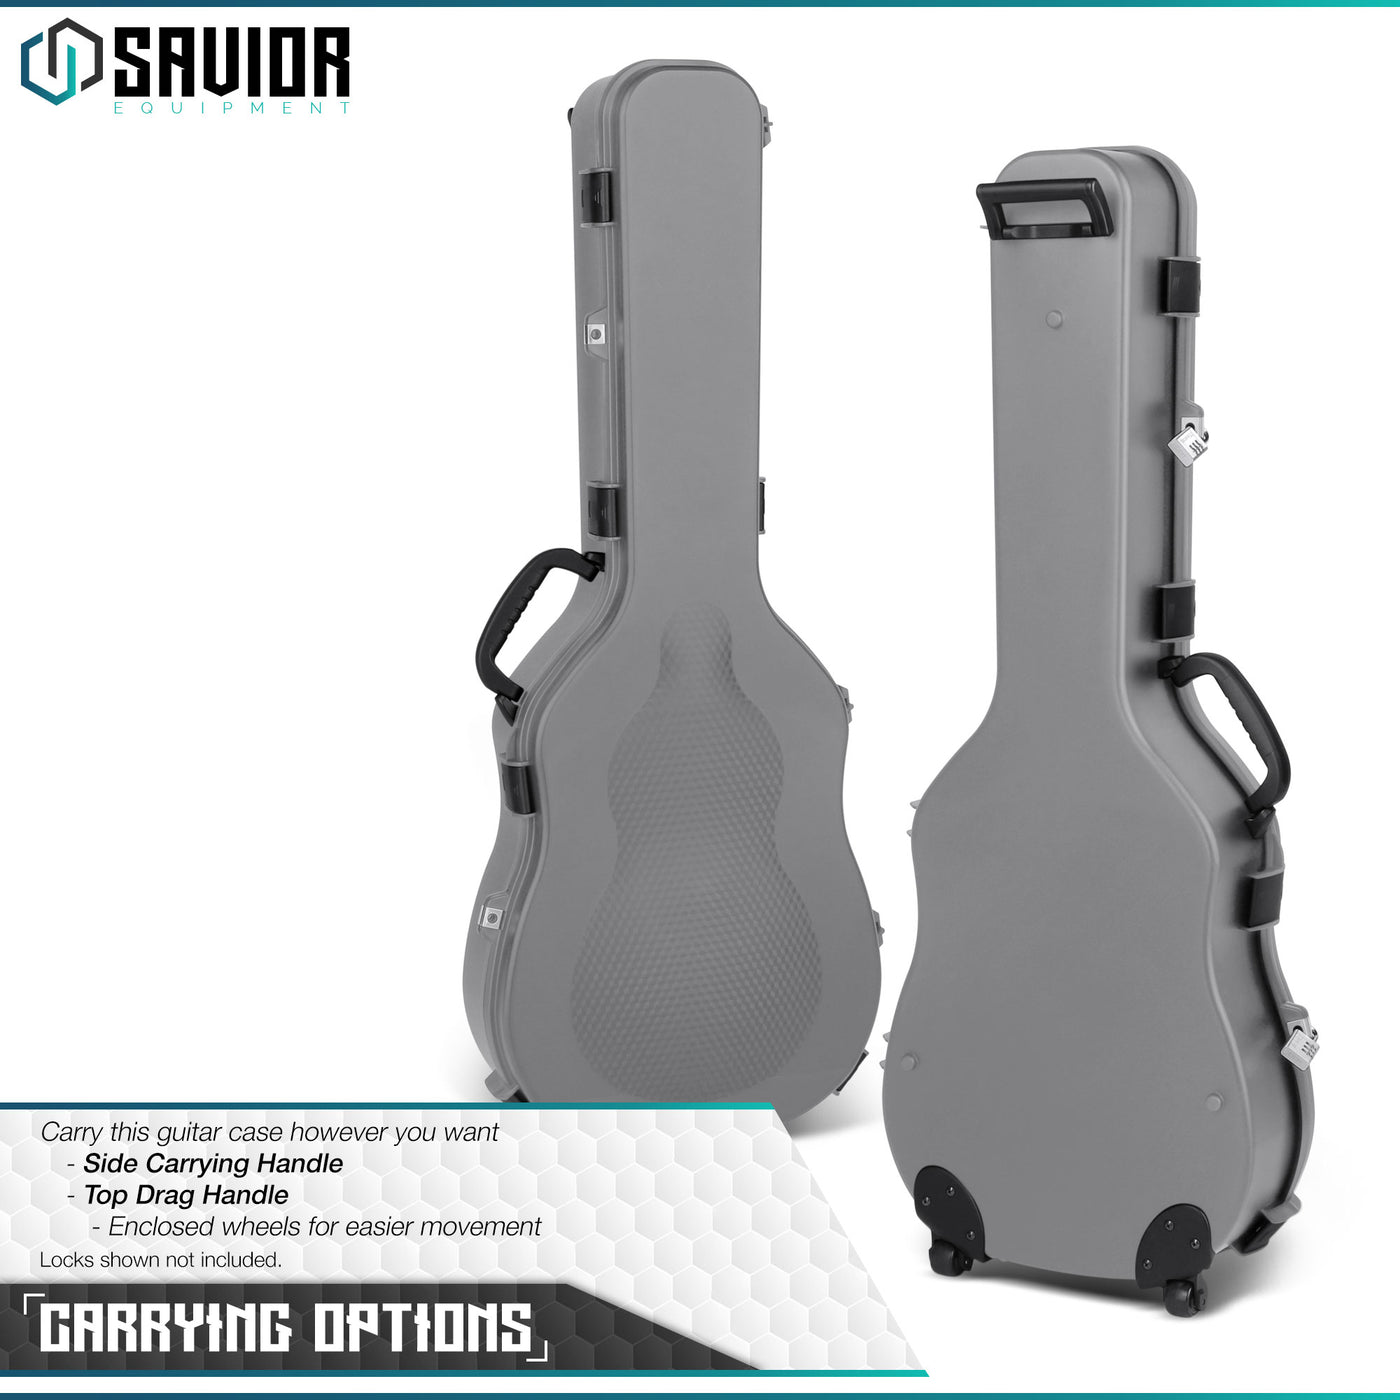 Multiple Carrying Options - You can carry our guitar case with side carrying handle or top drag handle with enclosed wheels for easier movement. Locks shown not included.